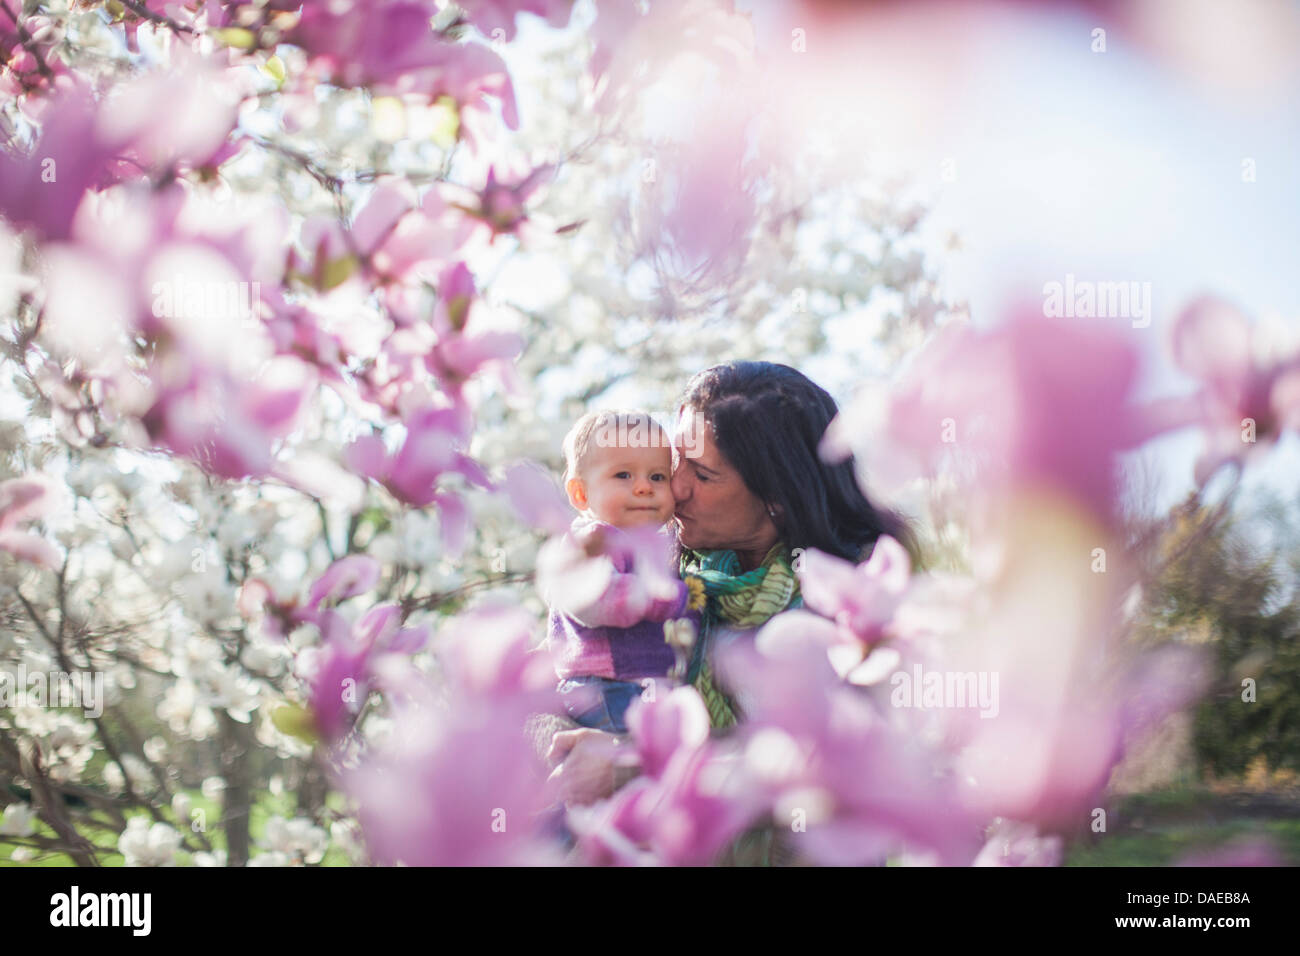 Granddaughter and grandmother amongst magnolia blossom Stock Photo